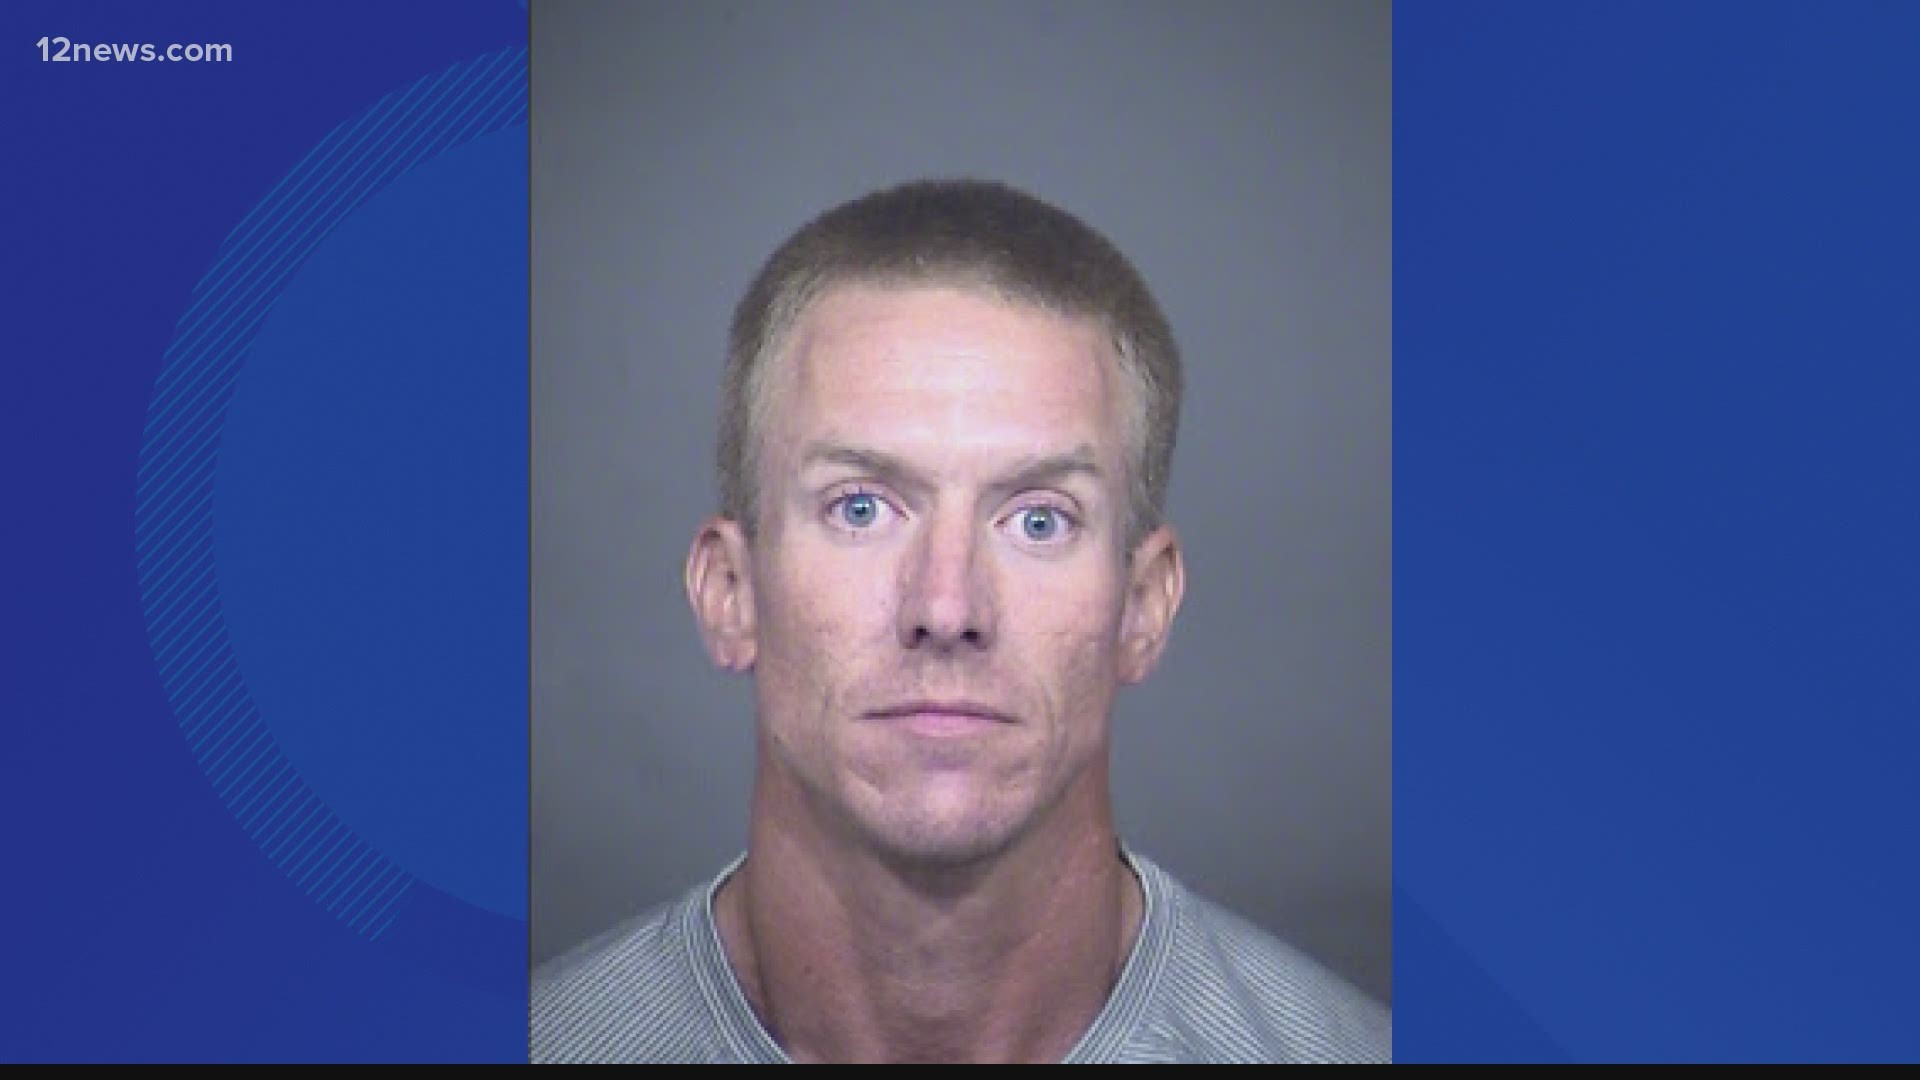 Man Accused Of Blowing Up Mailboxes Arrested In Mesa 6405